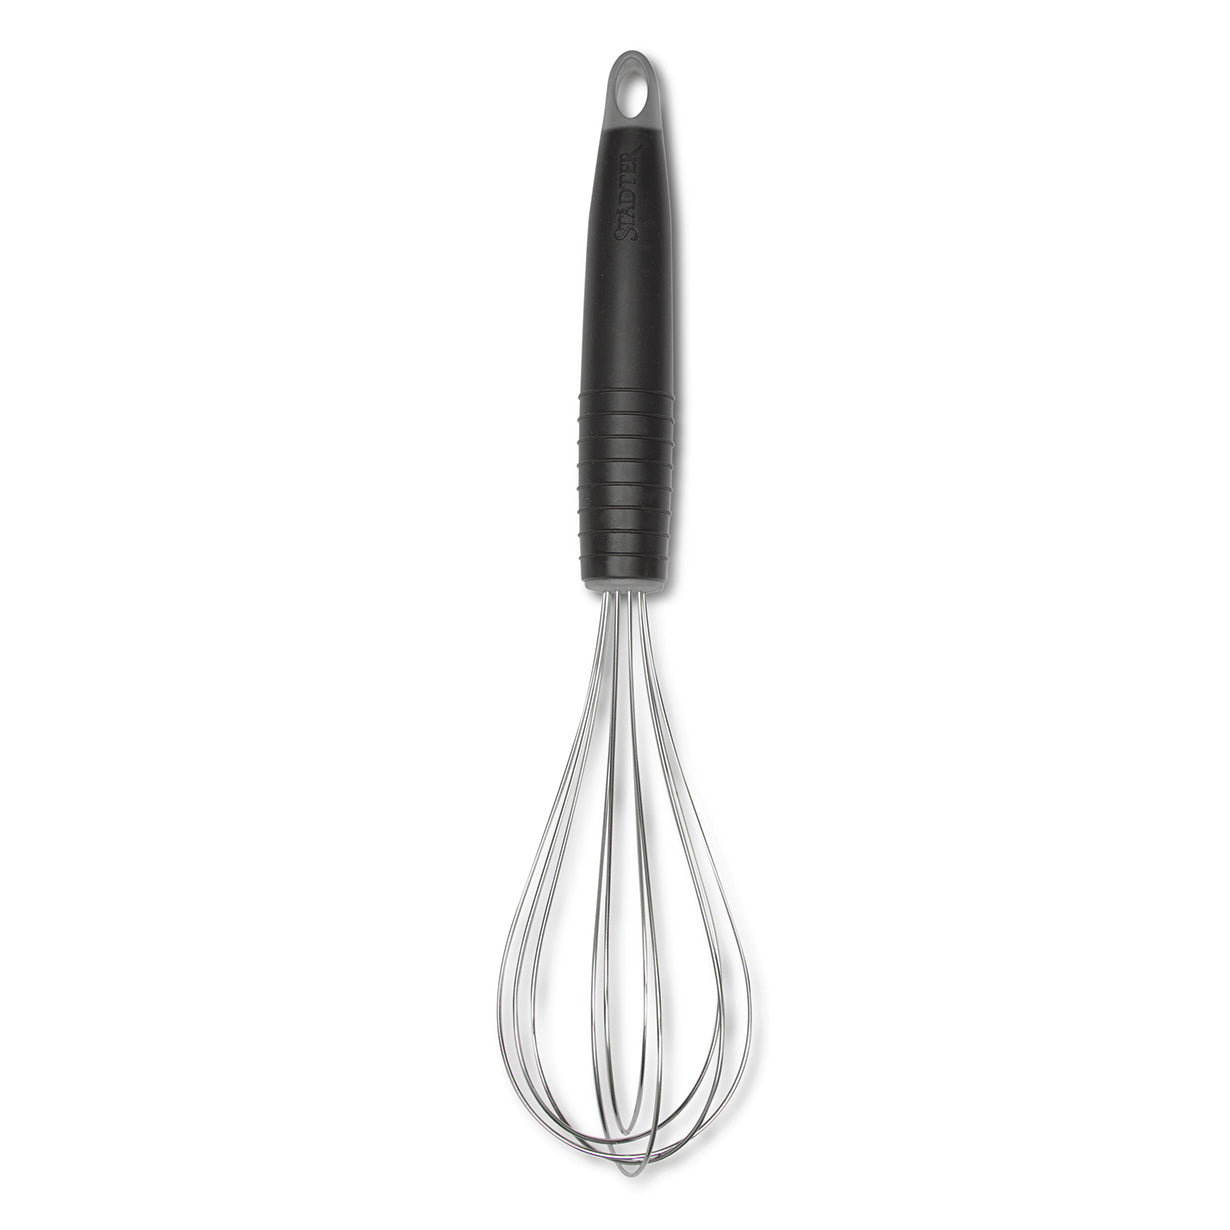 Cook Pro 12 Heavy Duty SS Soft Grip Whisk